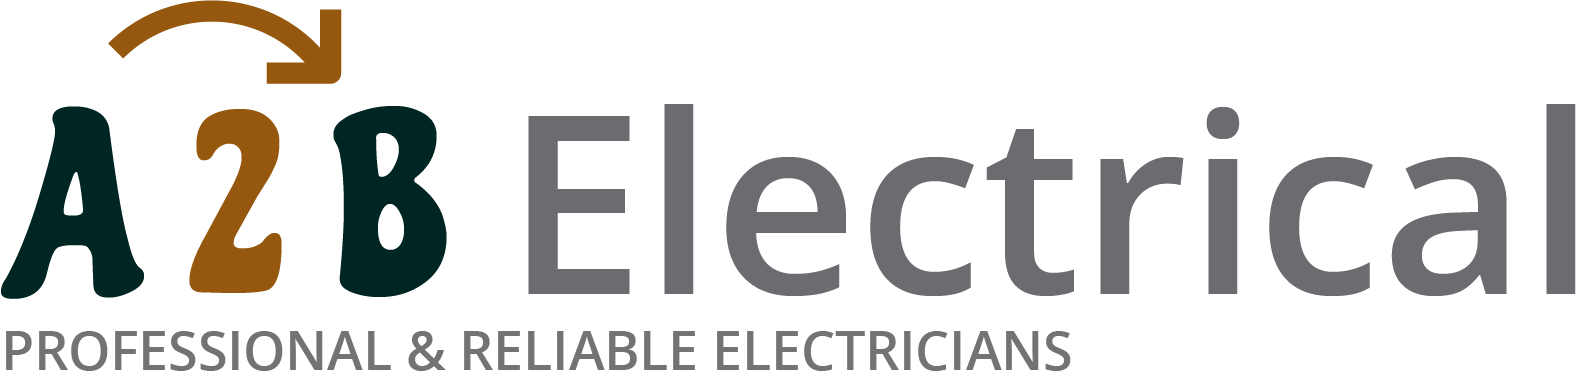 If you have electrical wiring problems in Poole, we can provide an electrician to have a look for you. 